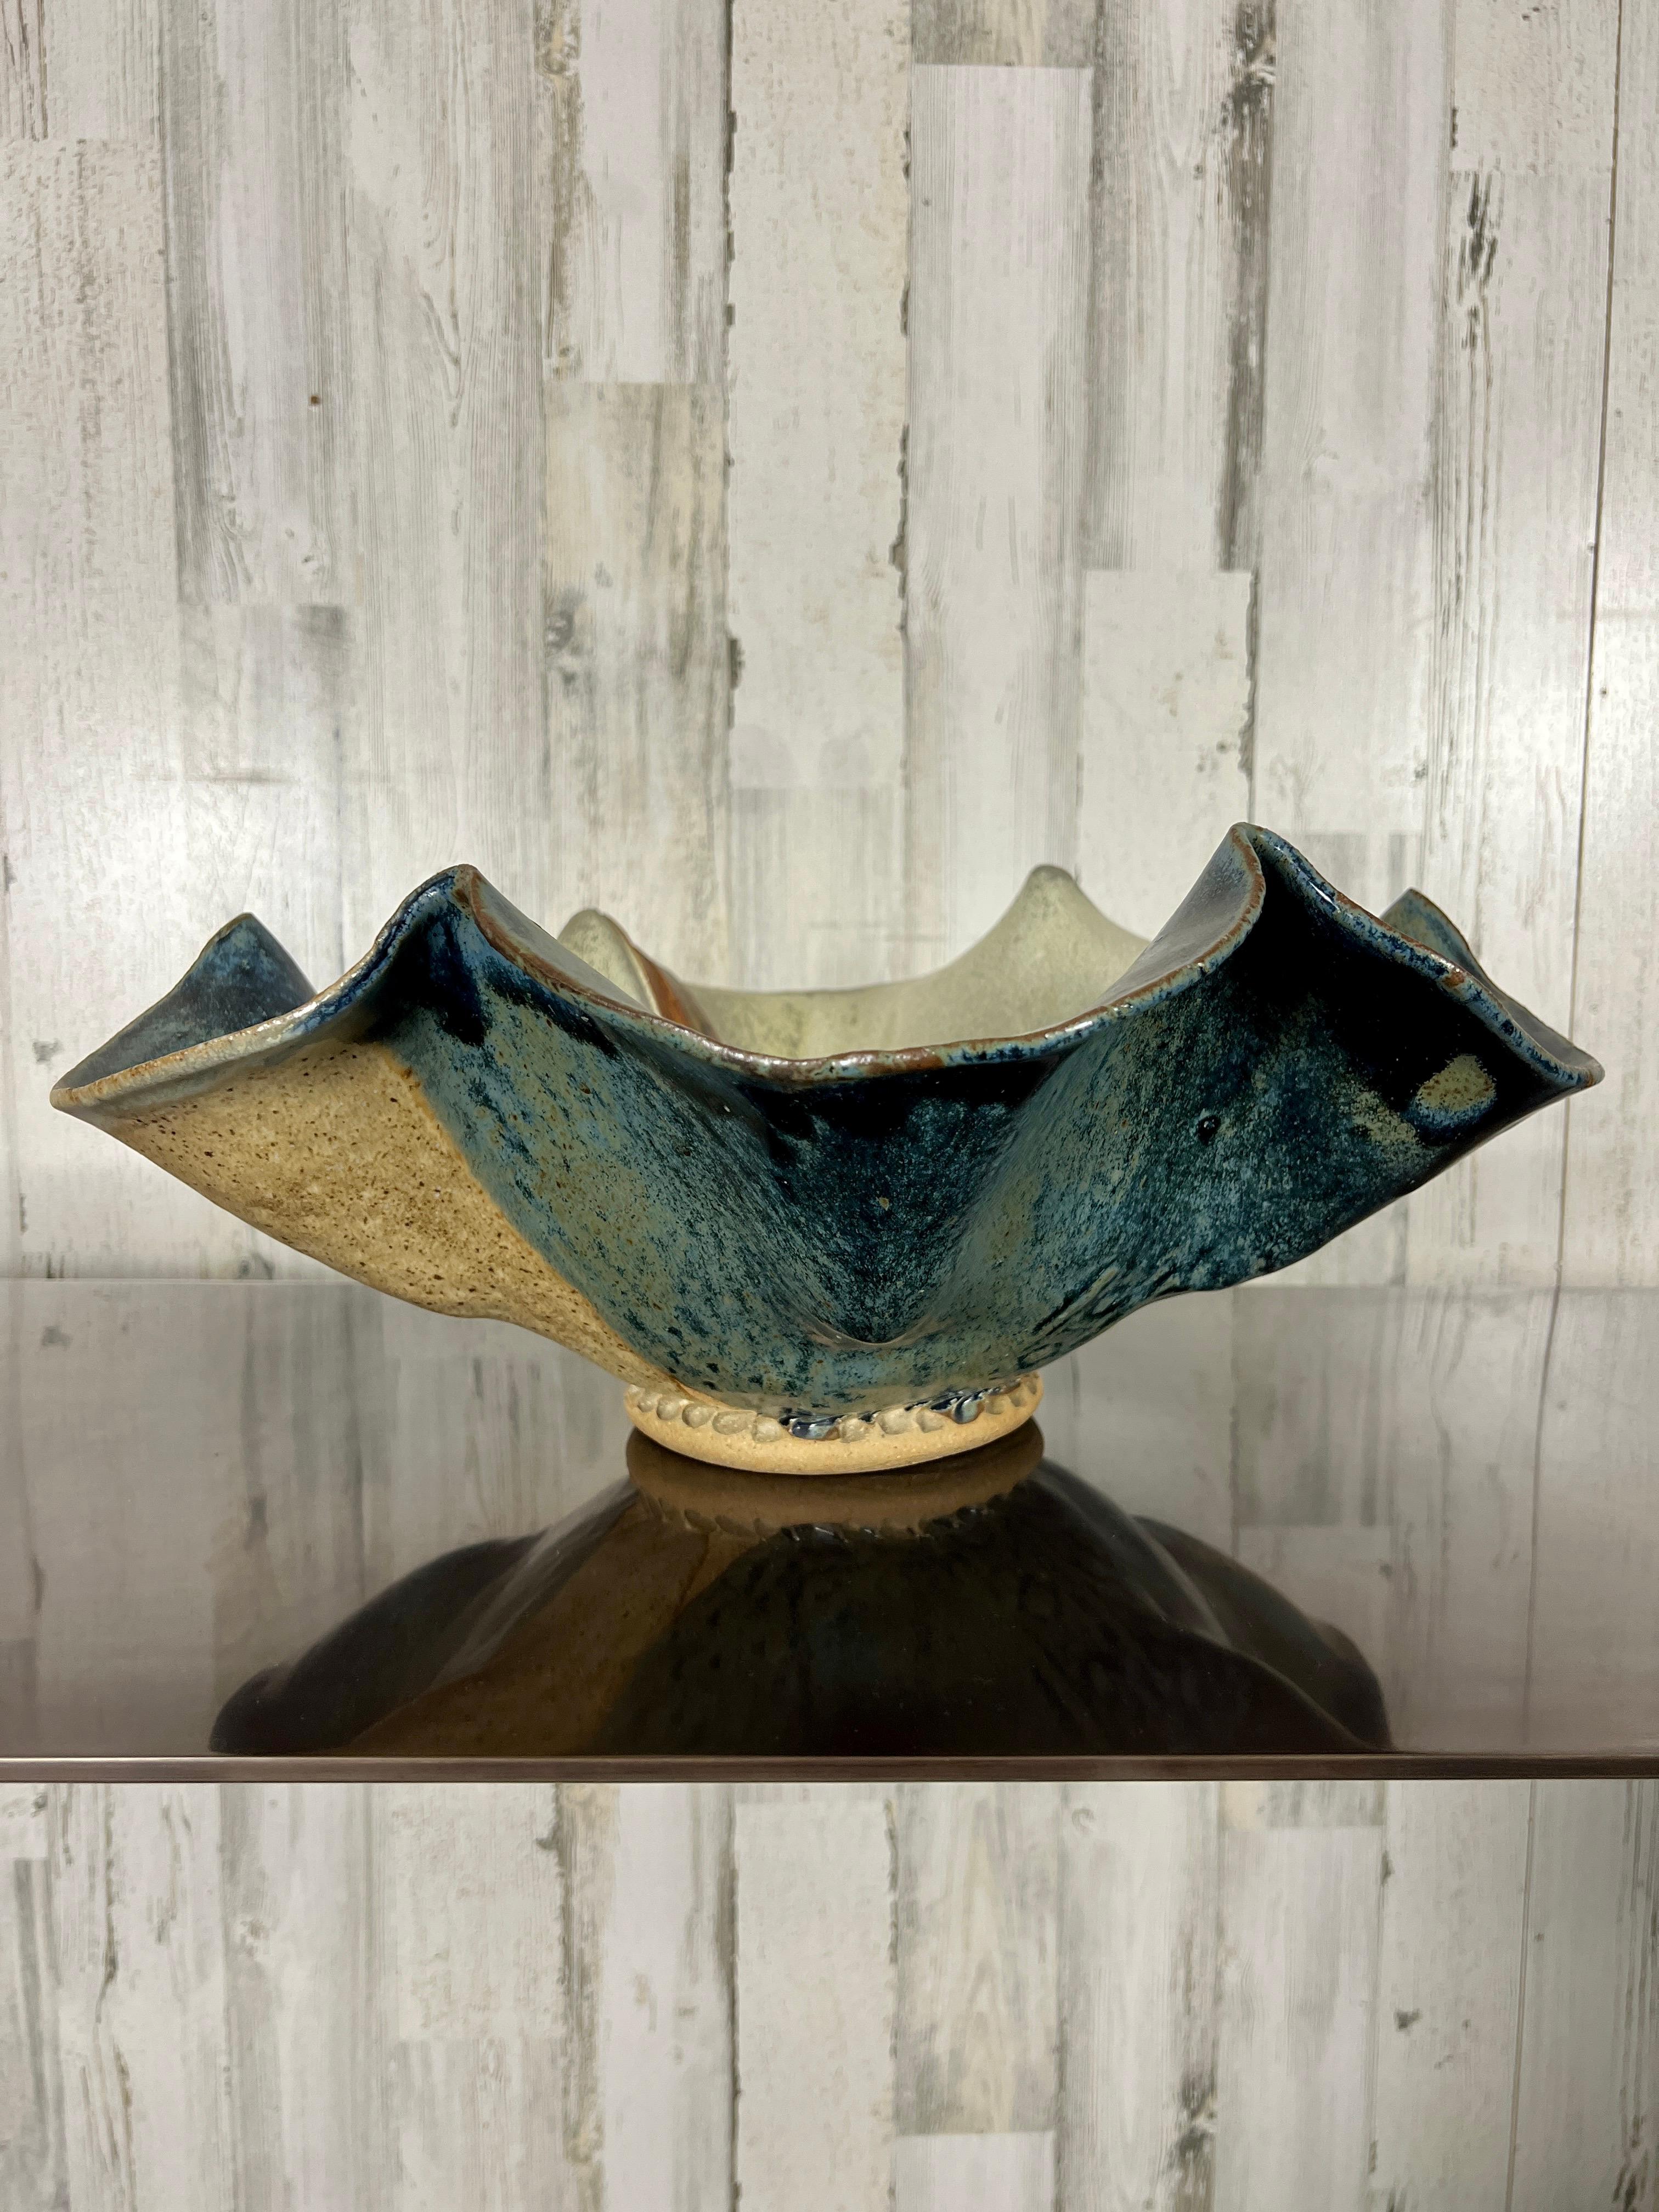 Multi-colored Post Modern clam shell design bowl with many different textures and patterns, some floral with repetitive design.